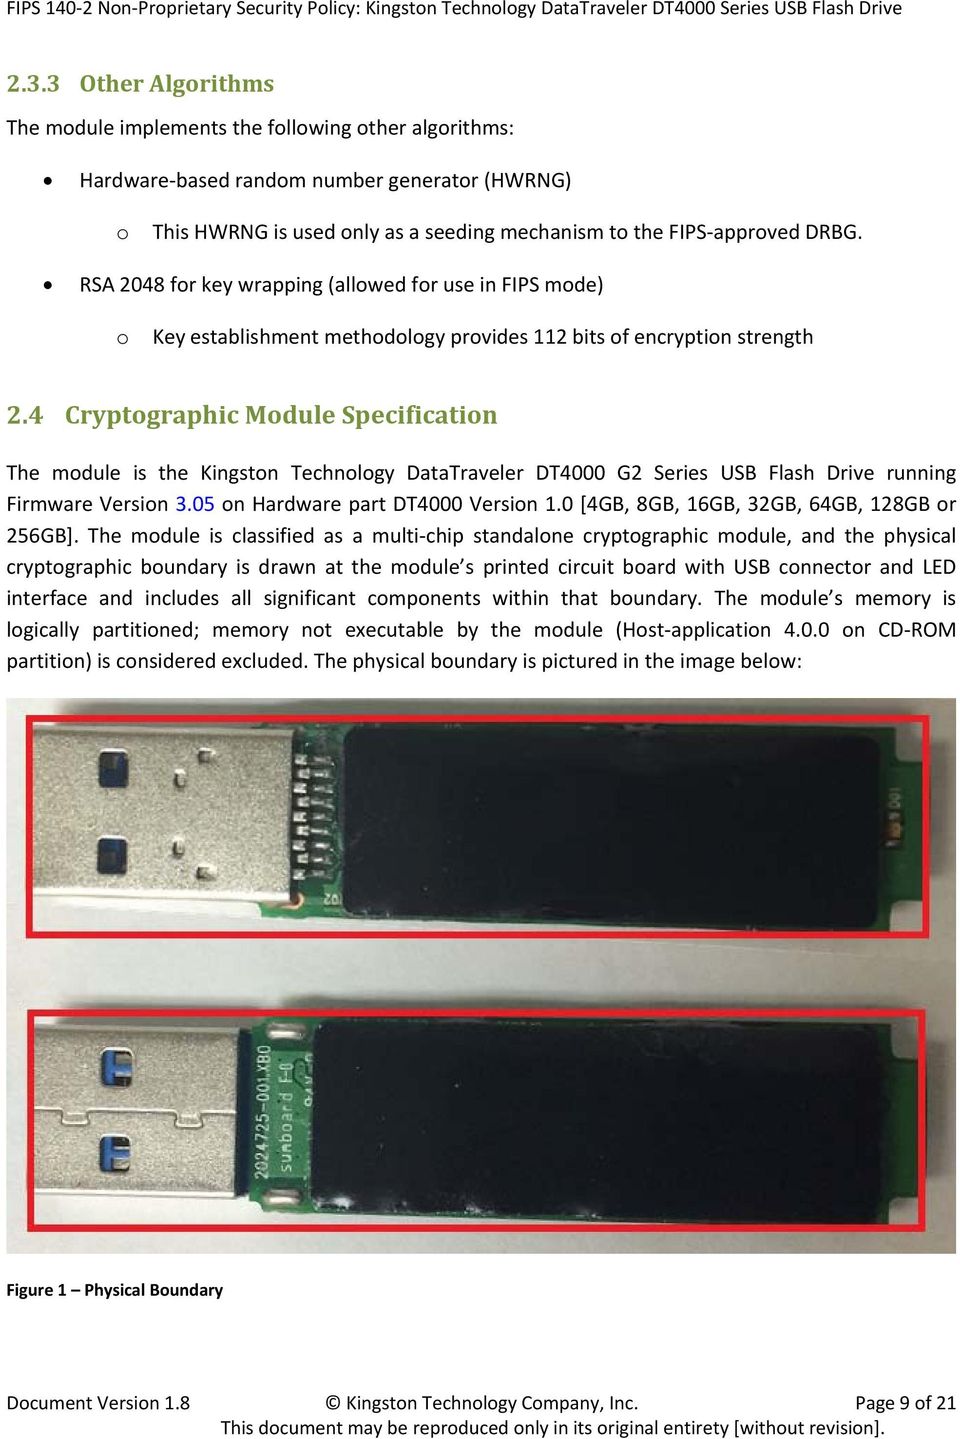 4 Cryptographic Module Specification The module is the Kingston Technology DataTraveler DT4000 G2 Series USB Flash Drive running Firmware Version 3.05 on Hardware part DT4000 Version 1.